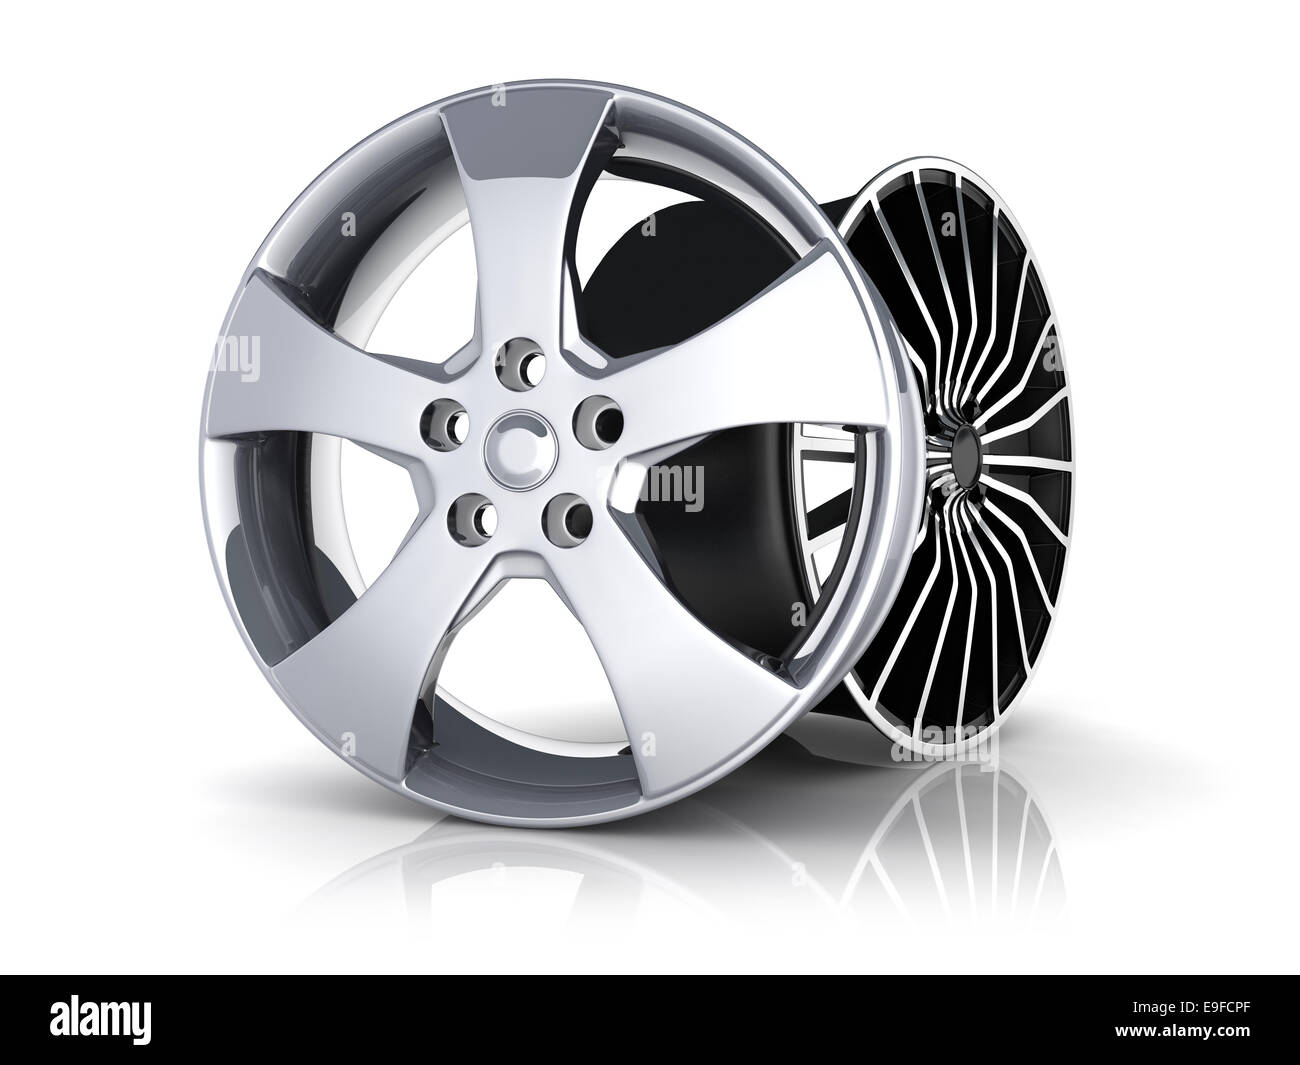 Two Rims car on white background (done in 3d) Stock Photo